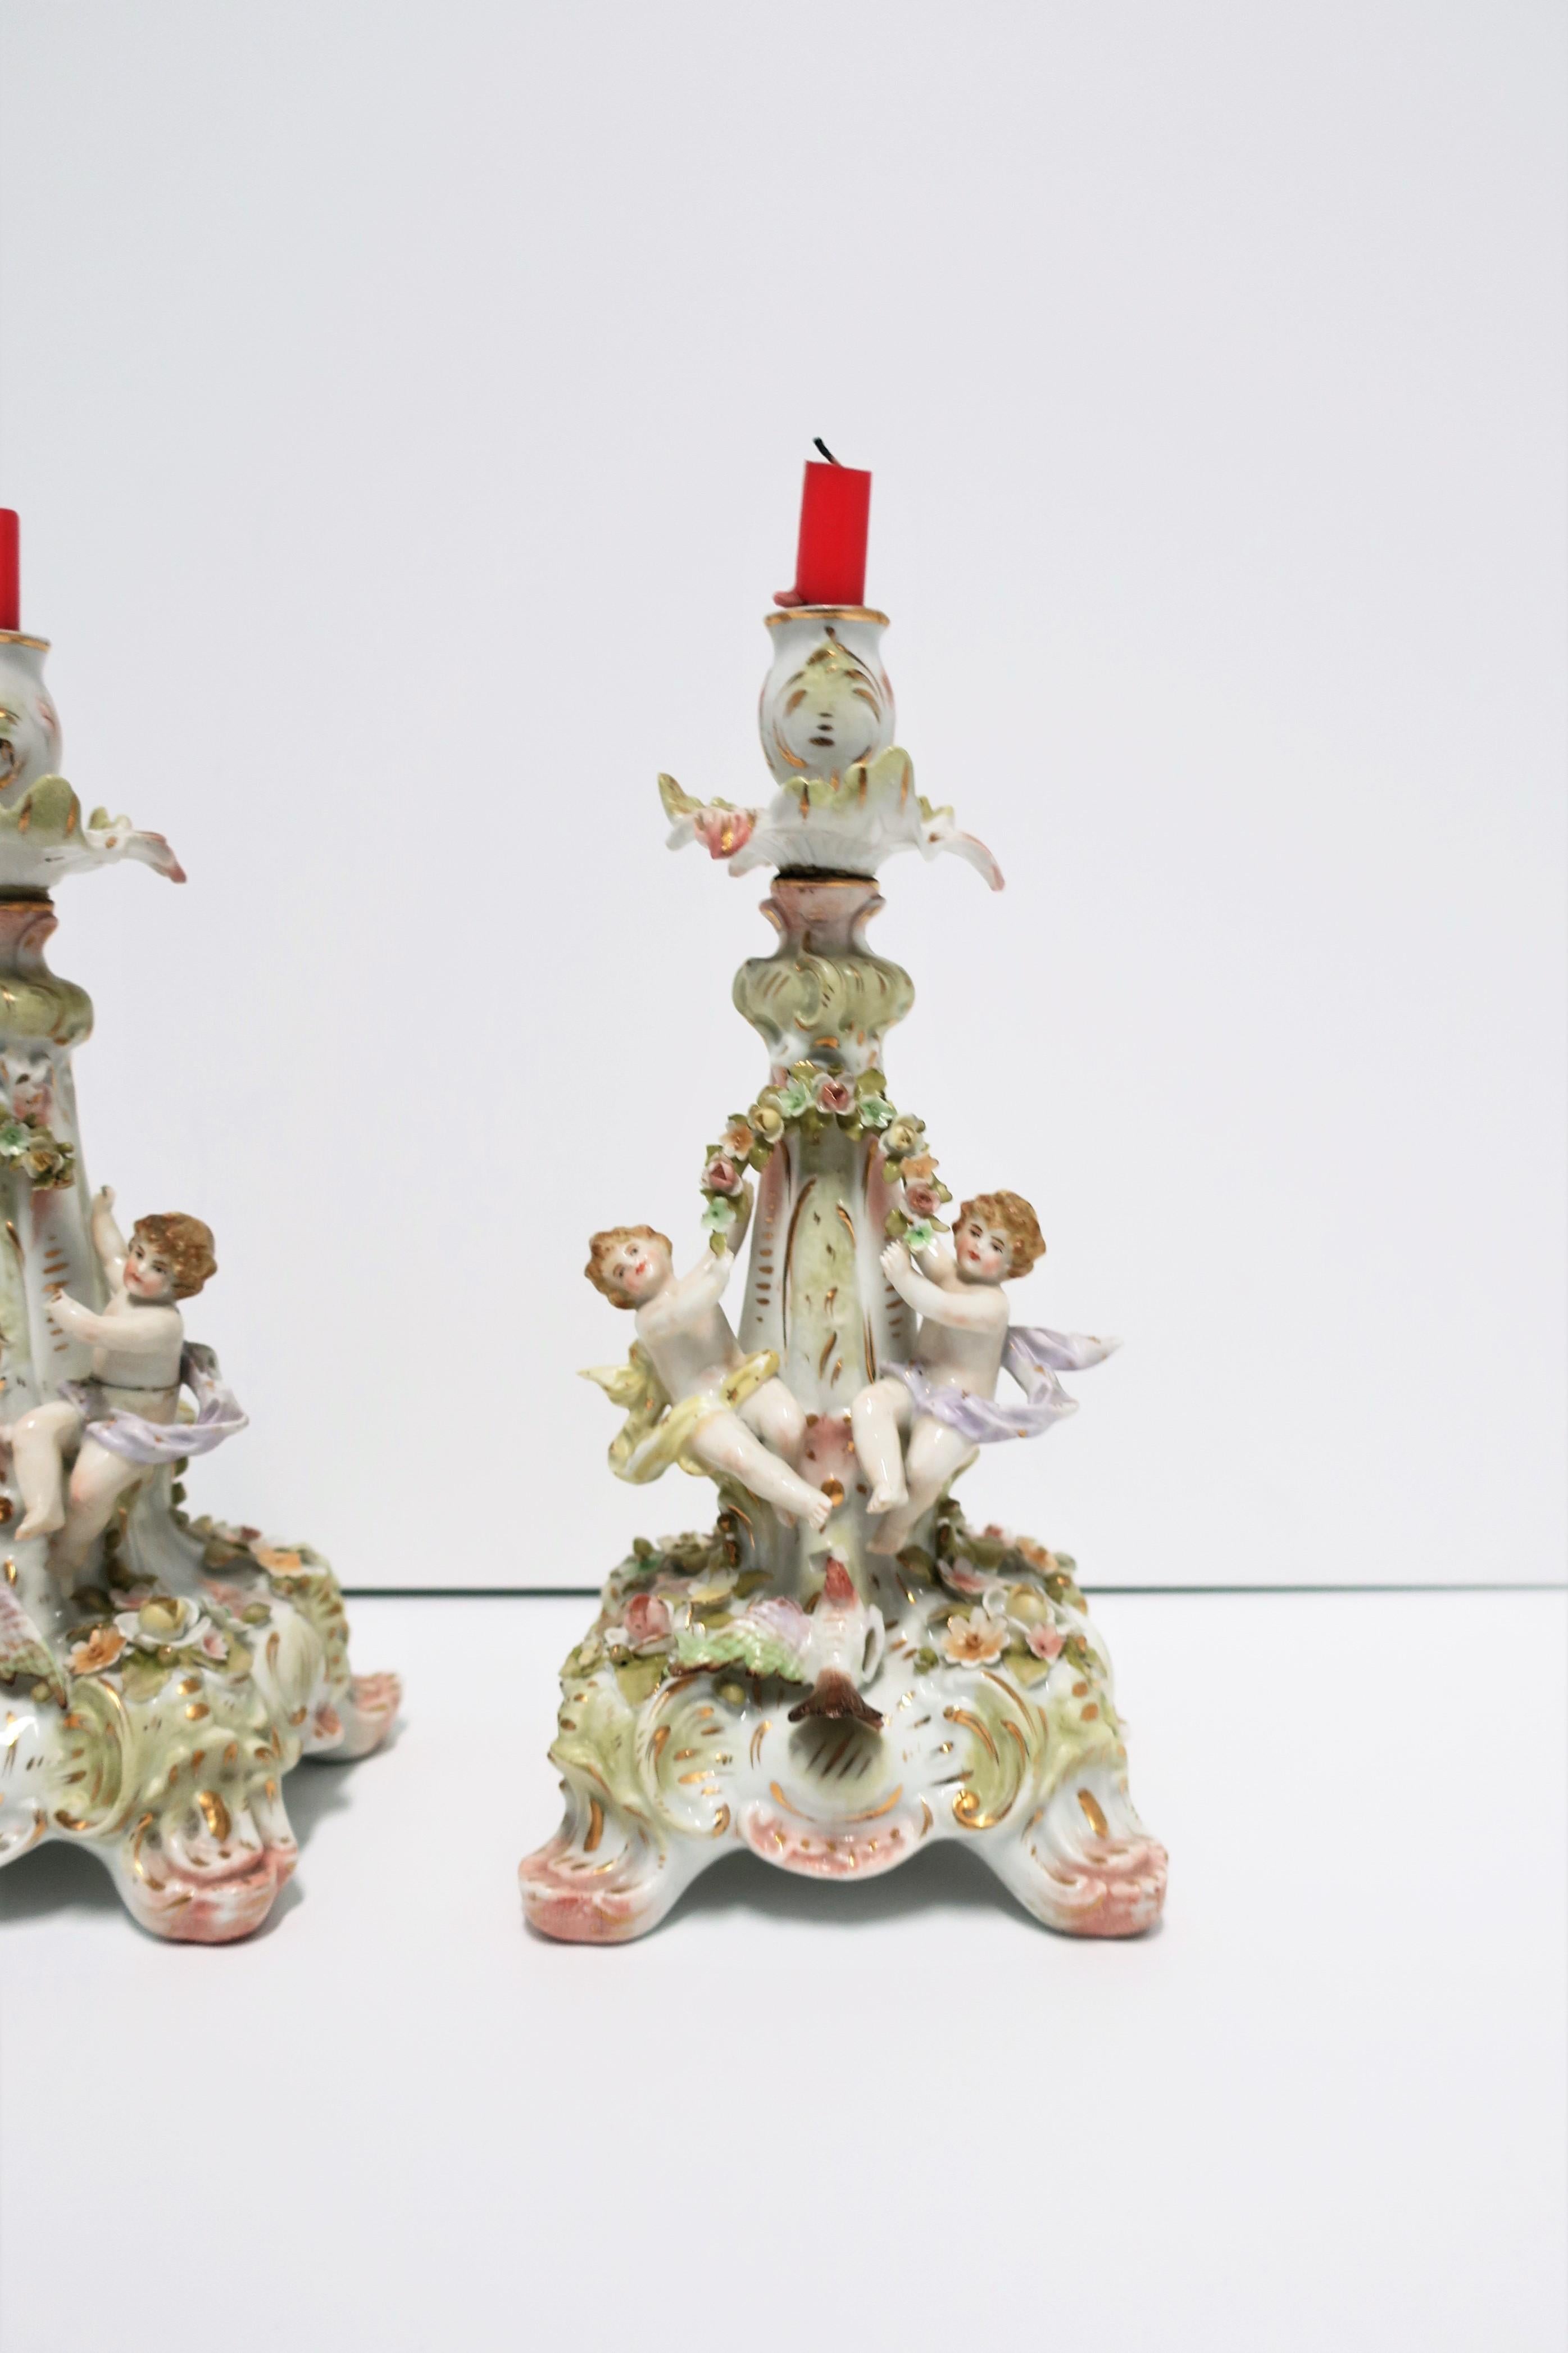 Antique Rococo German Porcelain Candlesticks Holders with Putti, Pair  For Sale 3